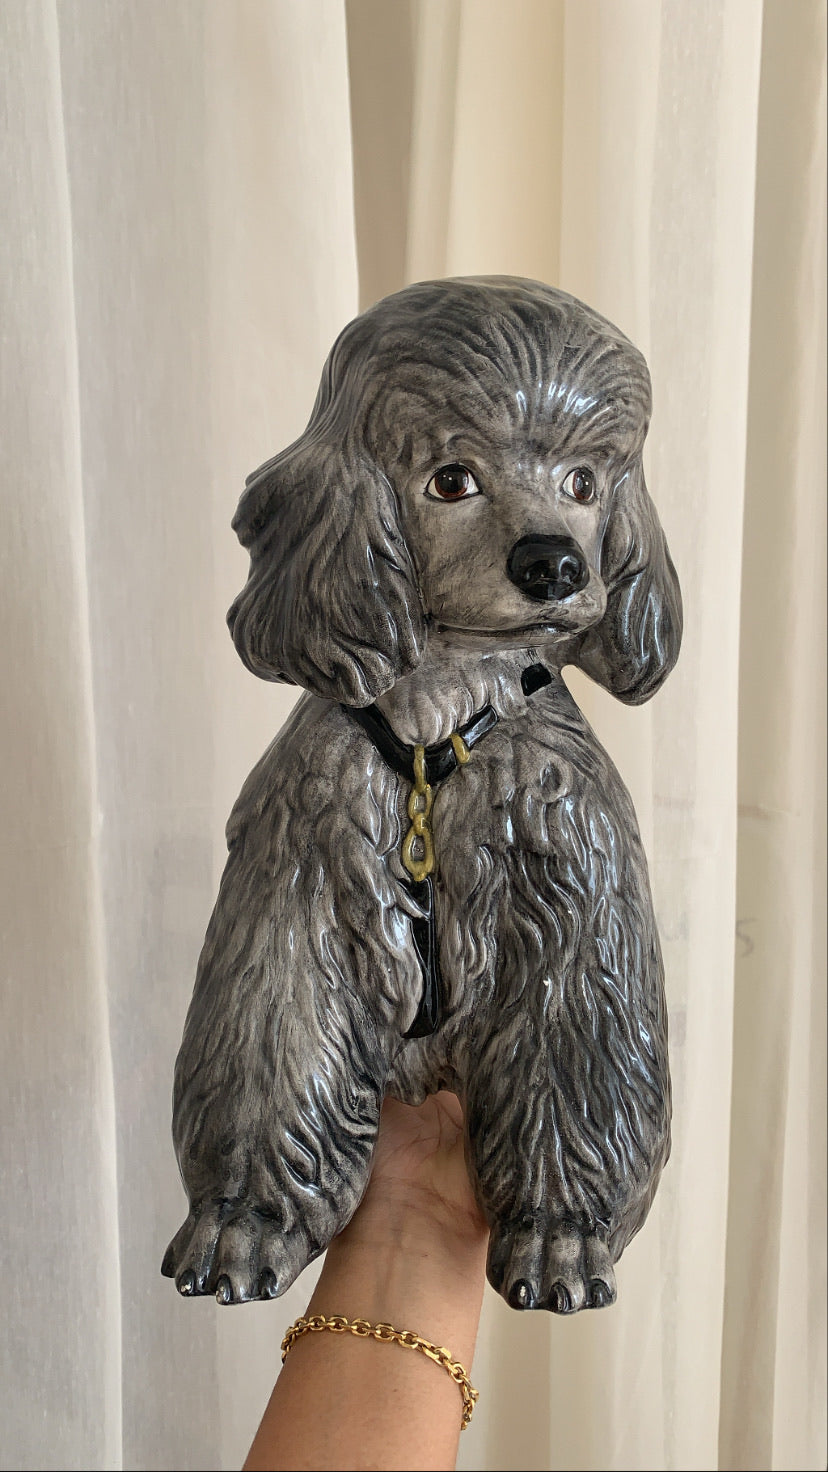 Life size Toy Poodle Statuette (Made In Italy)